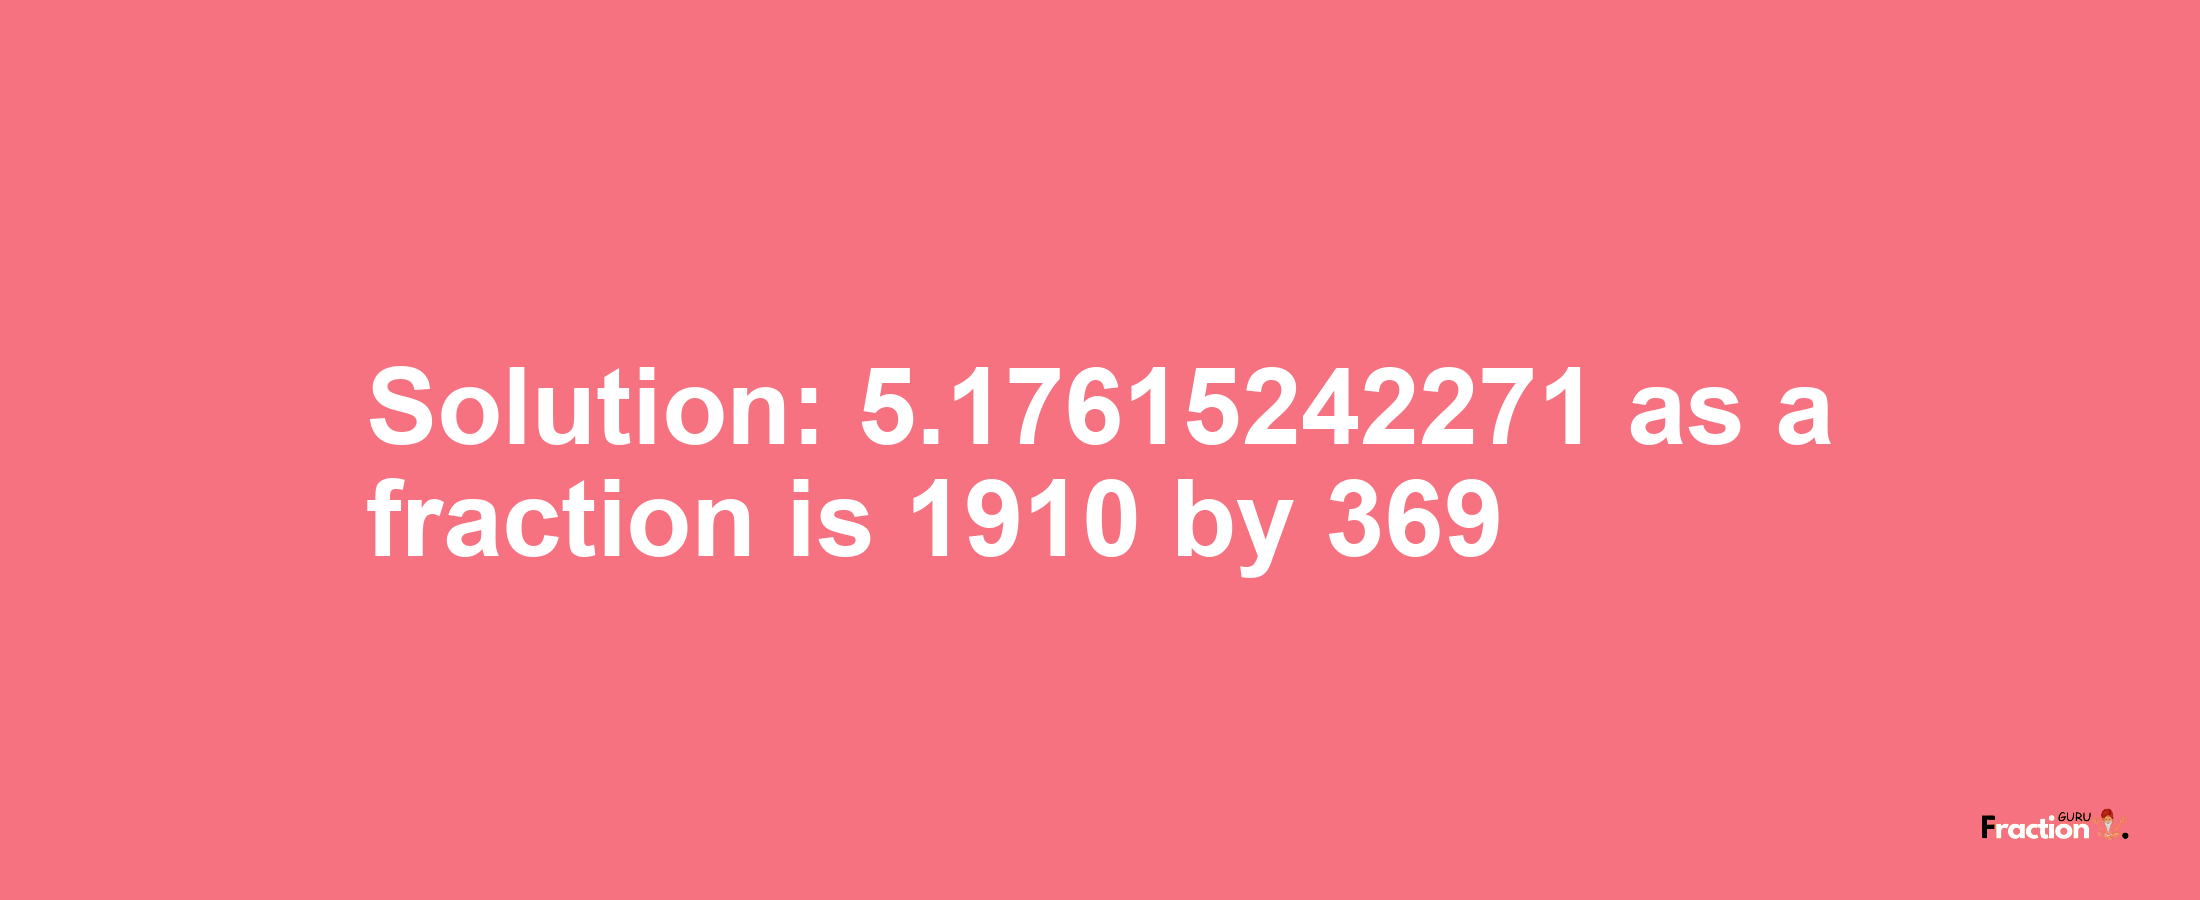 Solution:5.17615242271 as a fraction is 1910/369